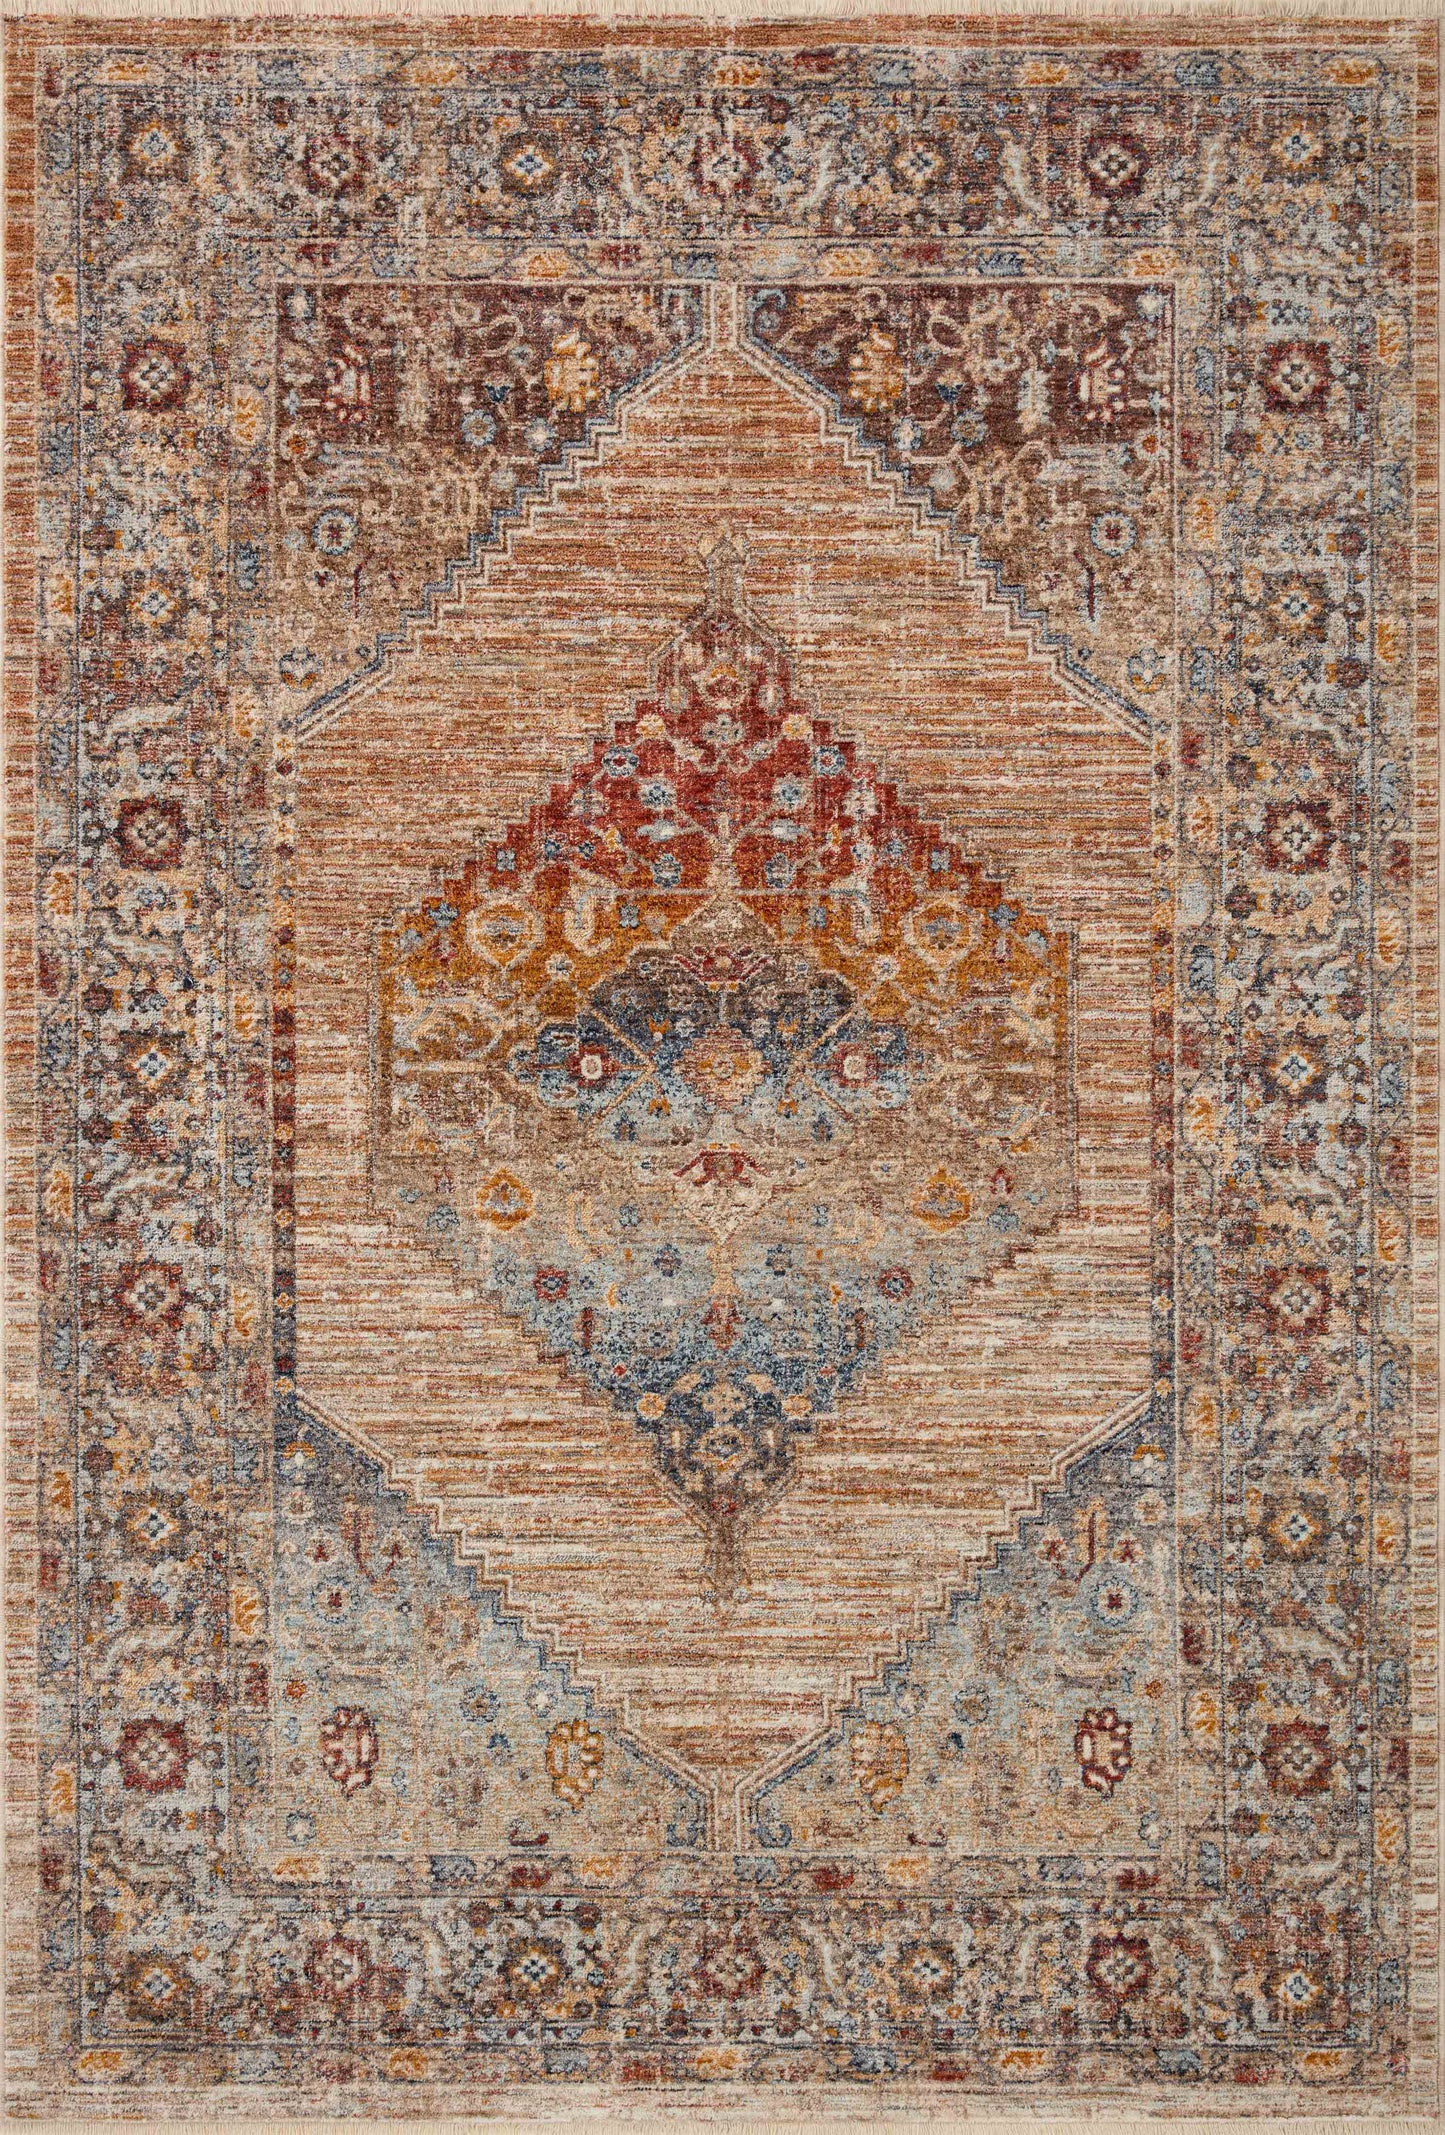 A picture of Loloi's Sorrento rug, in style SOR-06, color Multi / Sunset